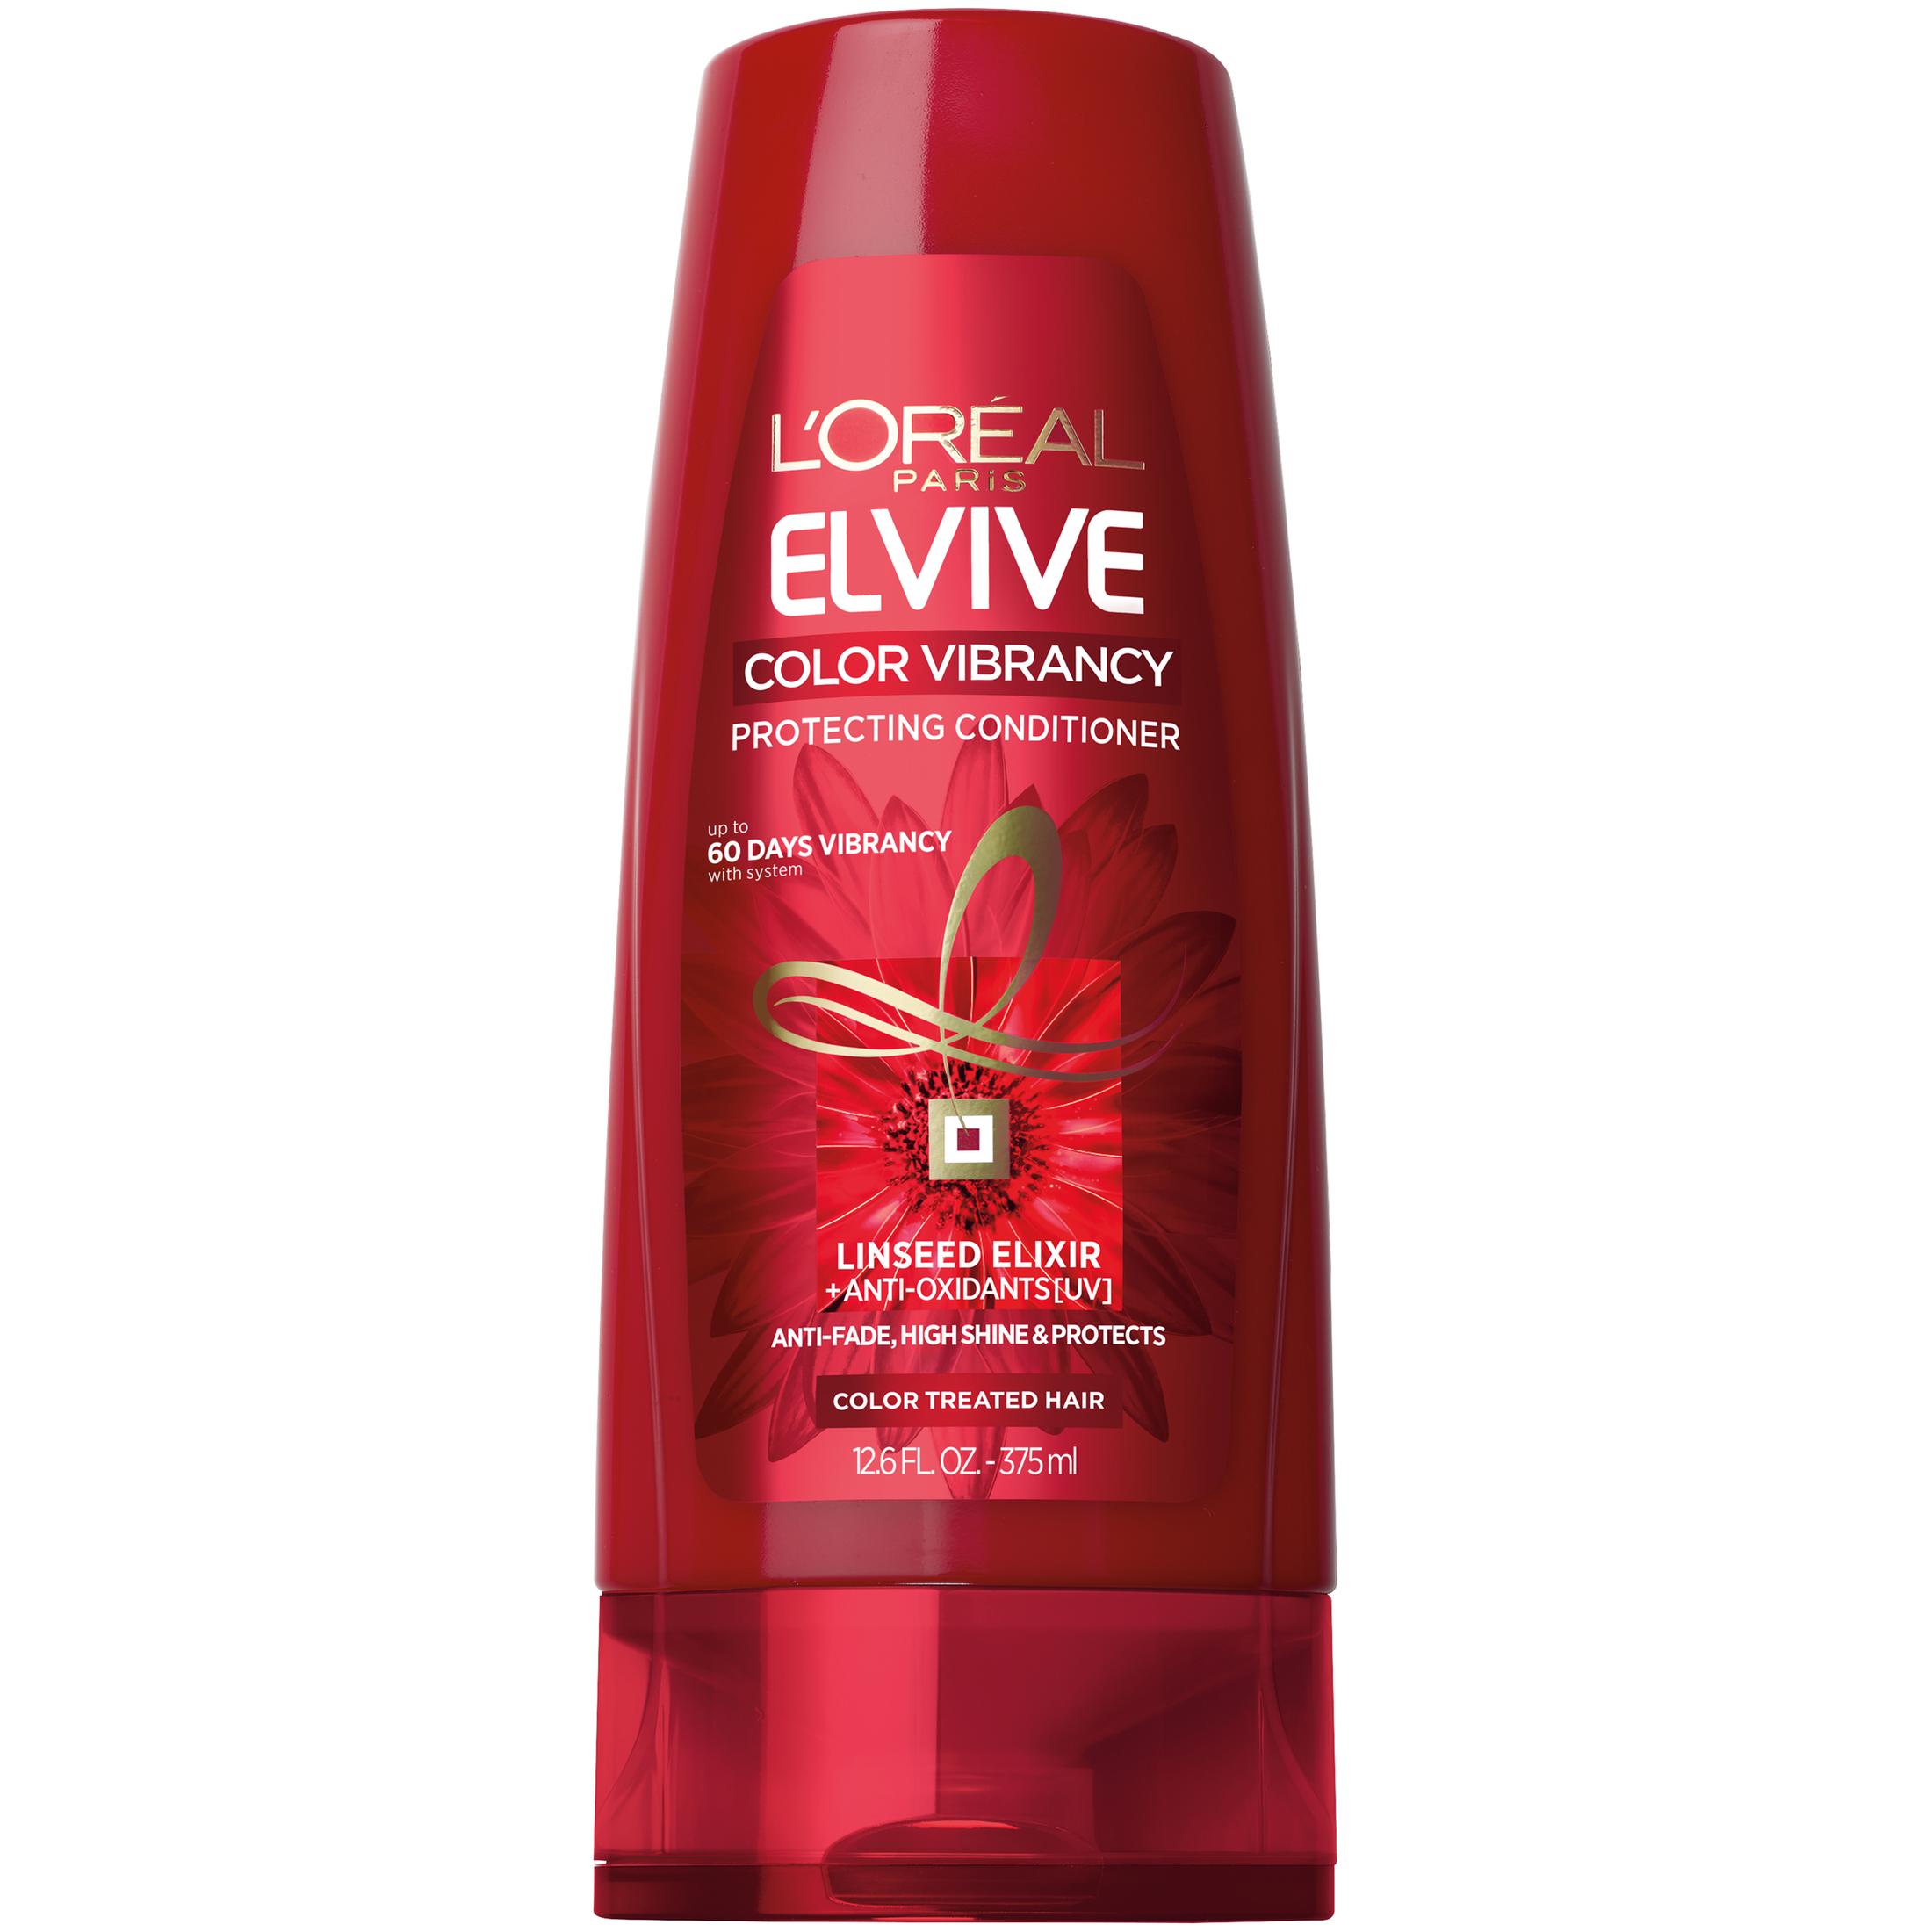 L'Oreal Elvive Color Vibrancy Protecting Conditioner with Linseed Elixir, 12.6 fl oz - image 1 of 7